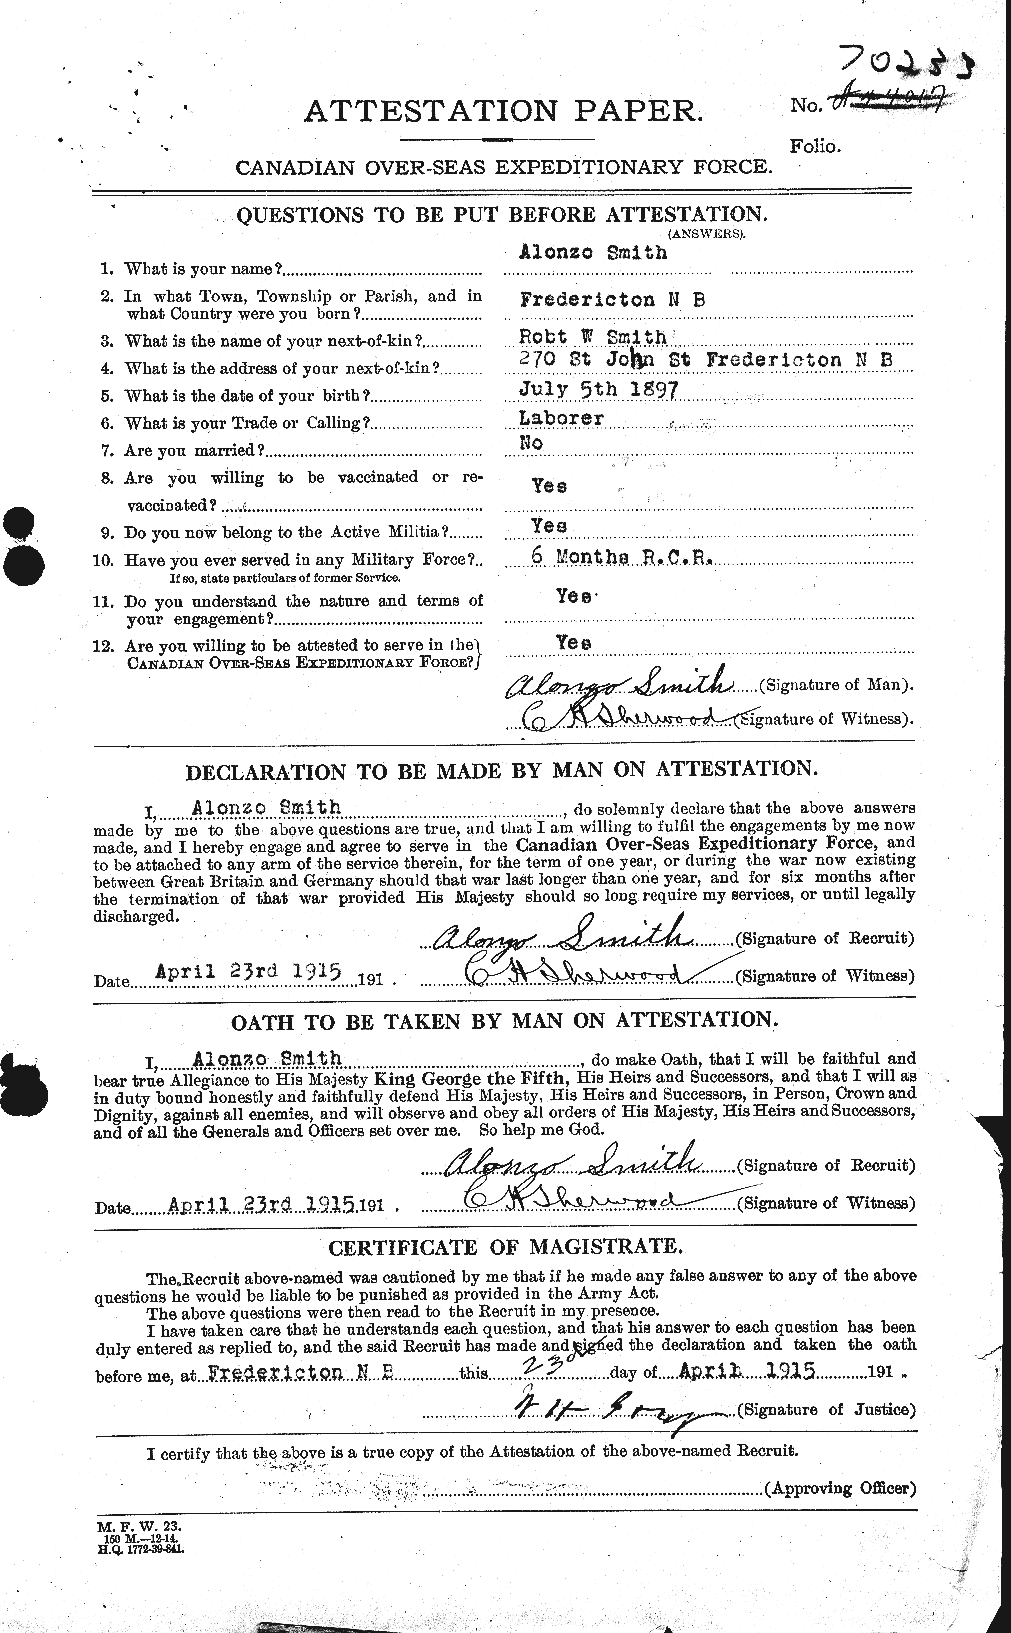 Personnel Records of the First World War - CEF 102784a